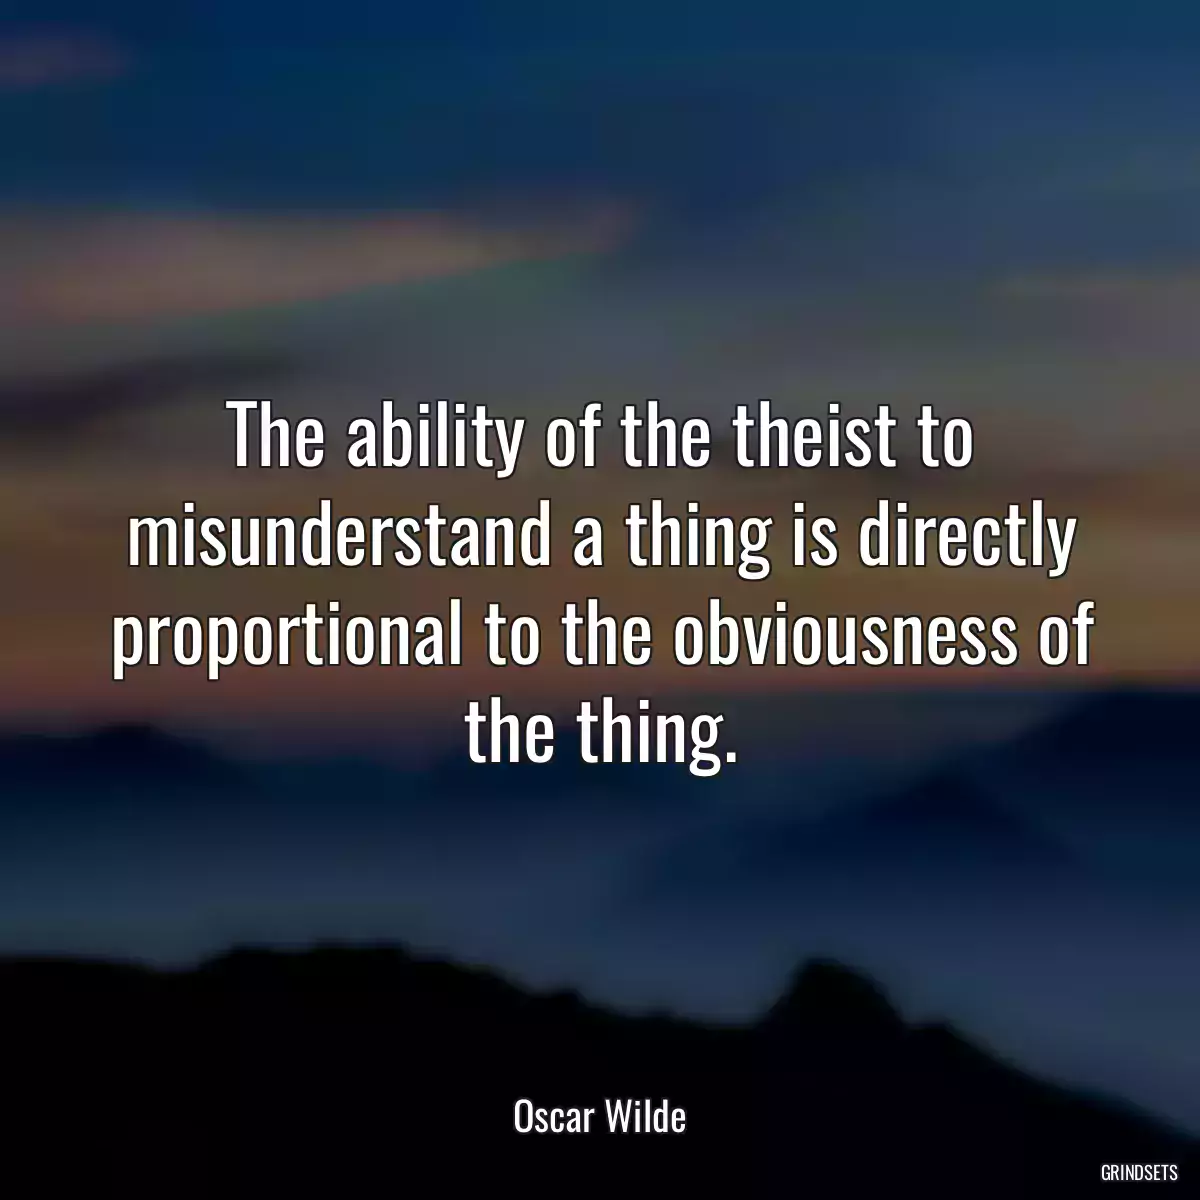 The ability of the theist to misunderstand a thing is directly proportional to the obviousness of the thing.